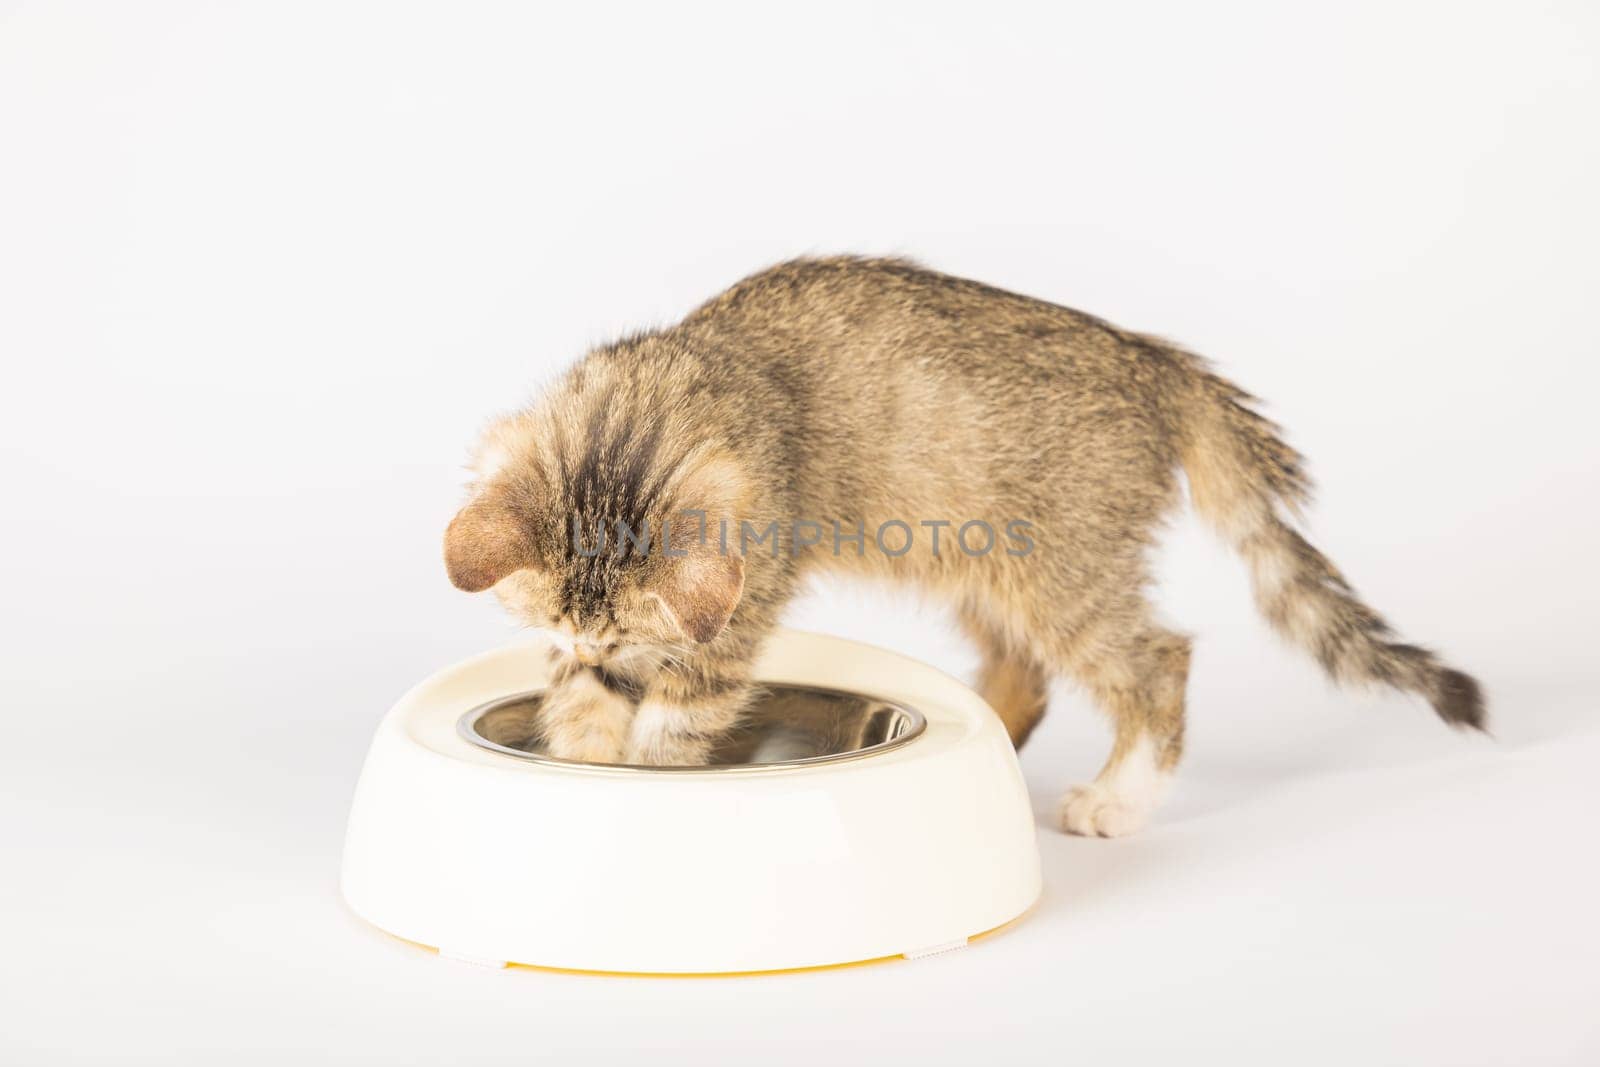 In an isolated setting a cute tabby kitten is sitting next to a food bowl eating its meal on the kitchen floor. The curious cat's fluffy tail and small tongue make for an endearing portrait.